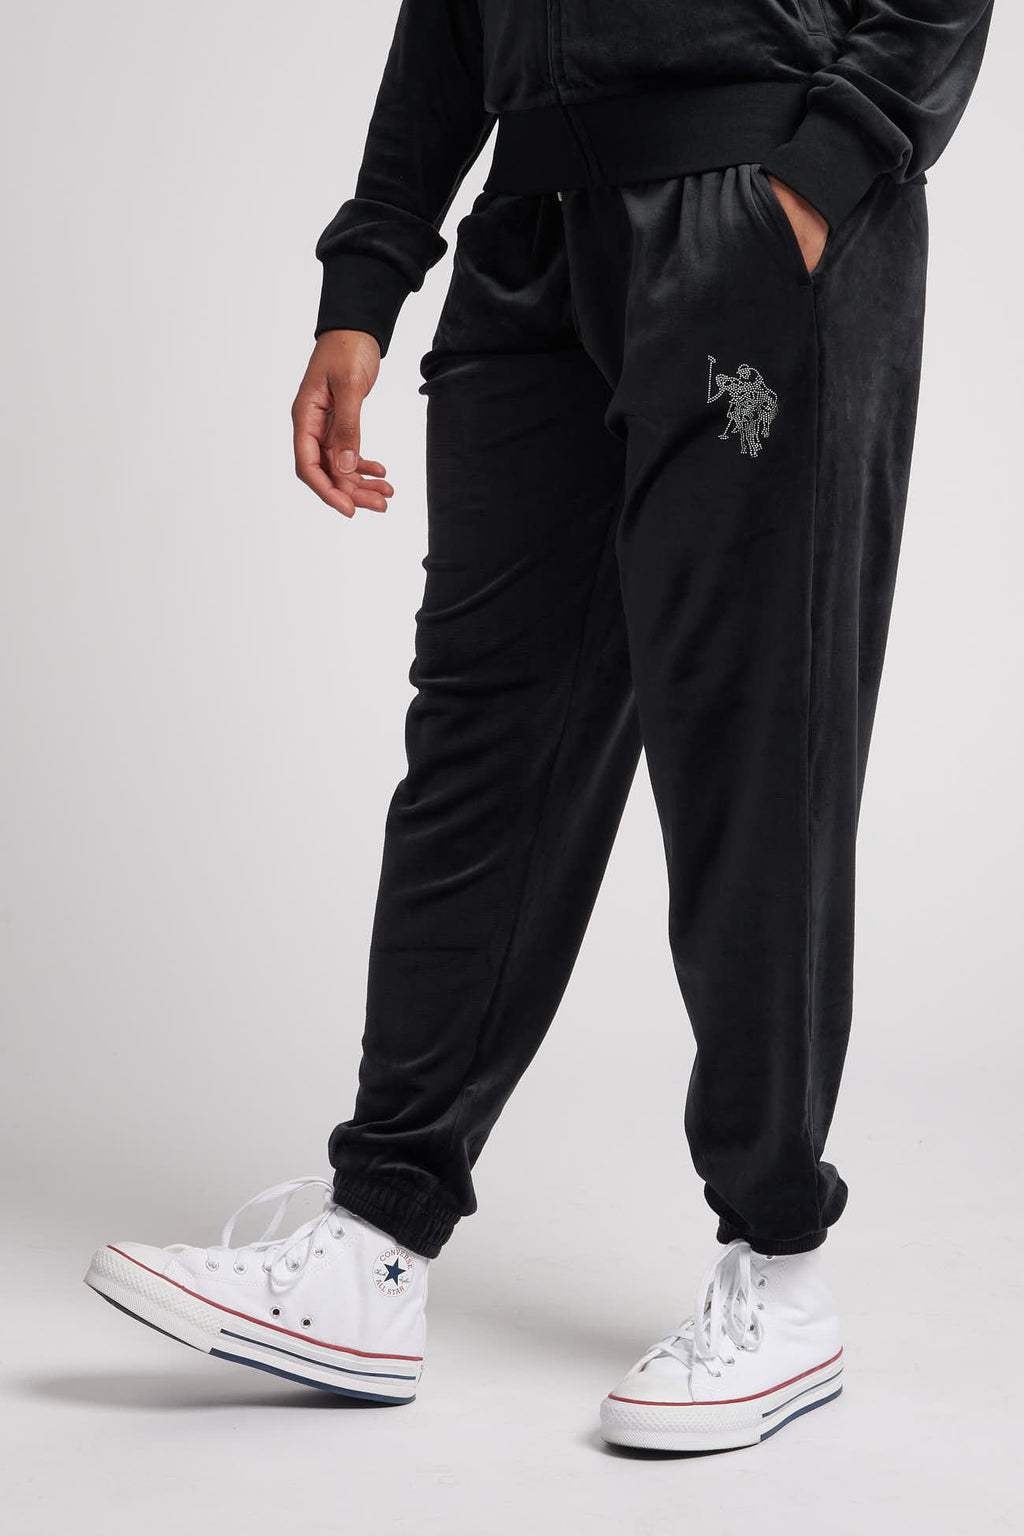 U.S. Polo Assn. Womens Velour Diamante Loose Fit Joggers in Cameo